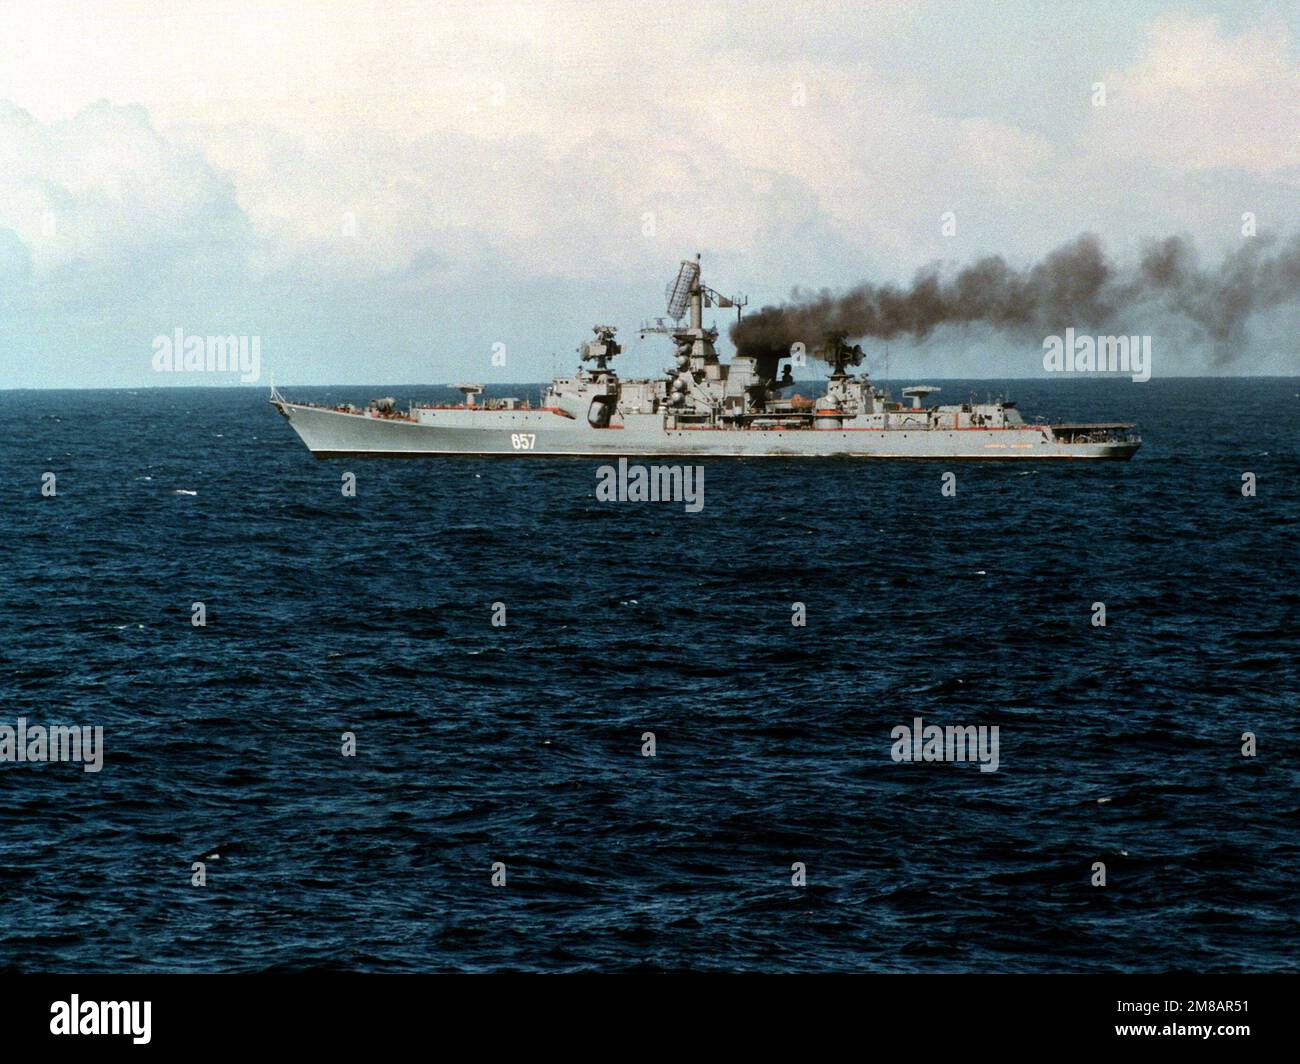 A port beam view of the Soviet Kresta II class guided missile cruiser ADMIRAL YUMASHEV underway. Country: Unknown Stock Photo